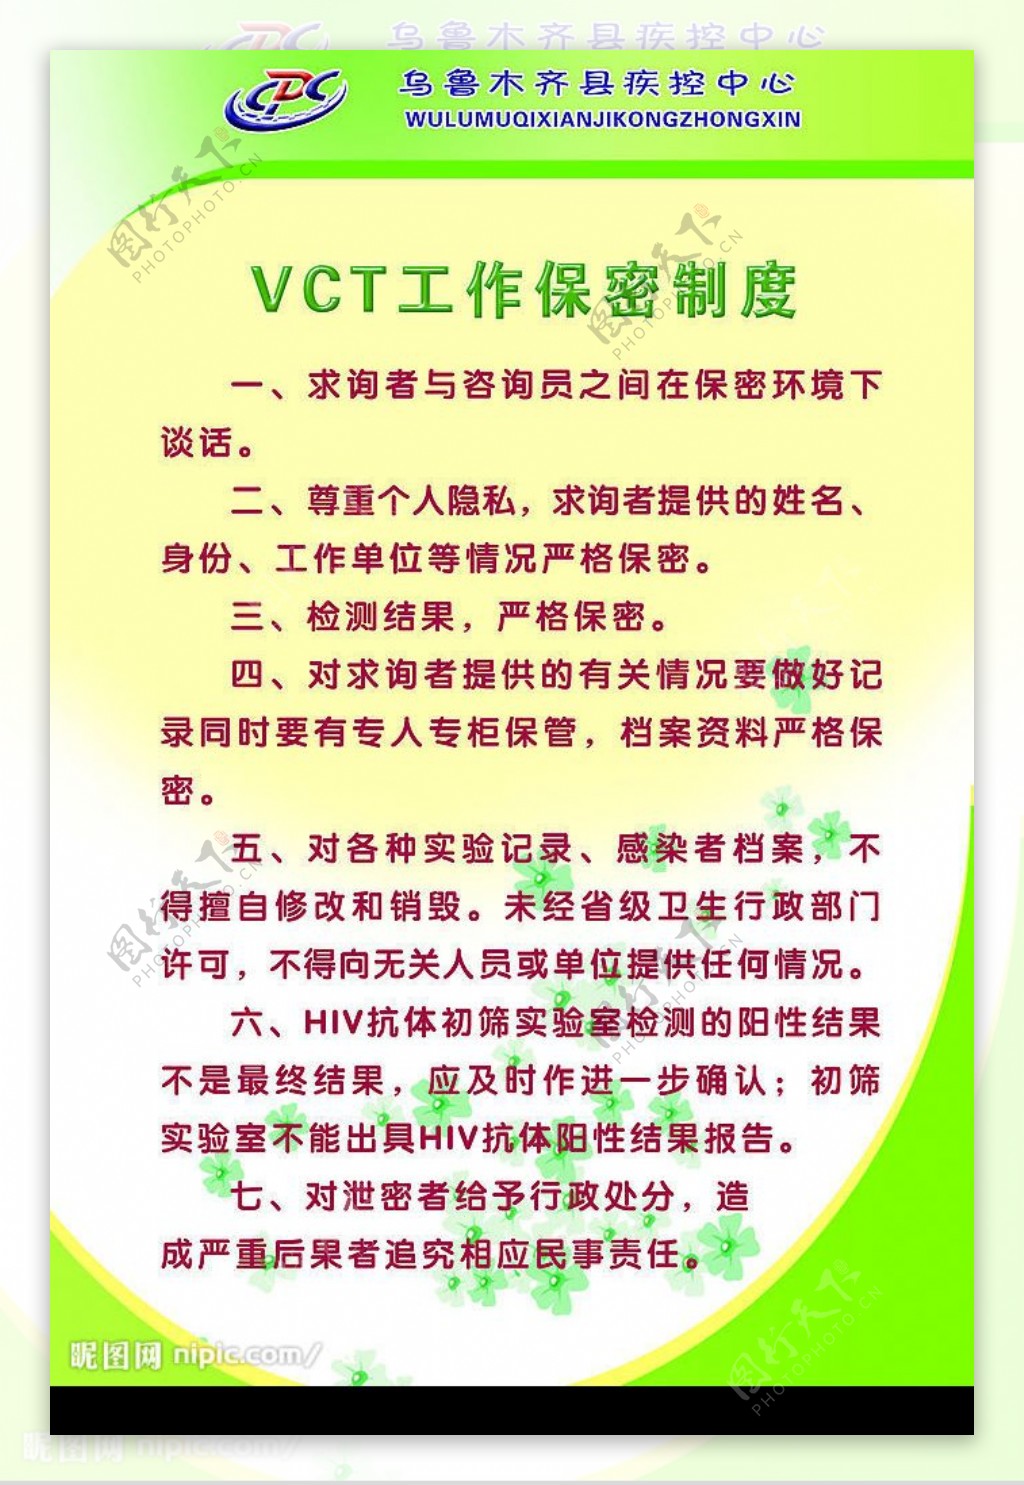 VCT工作保密制度图片